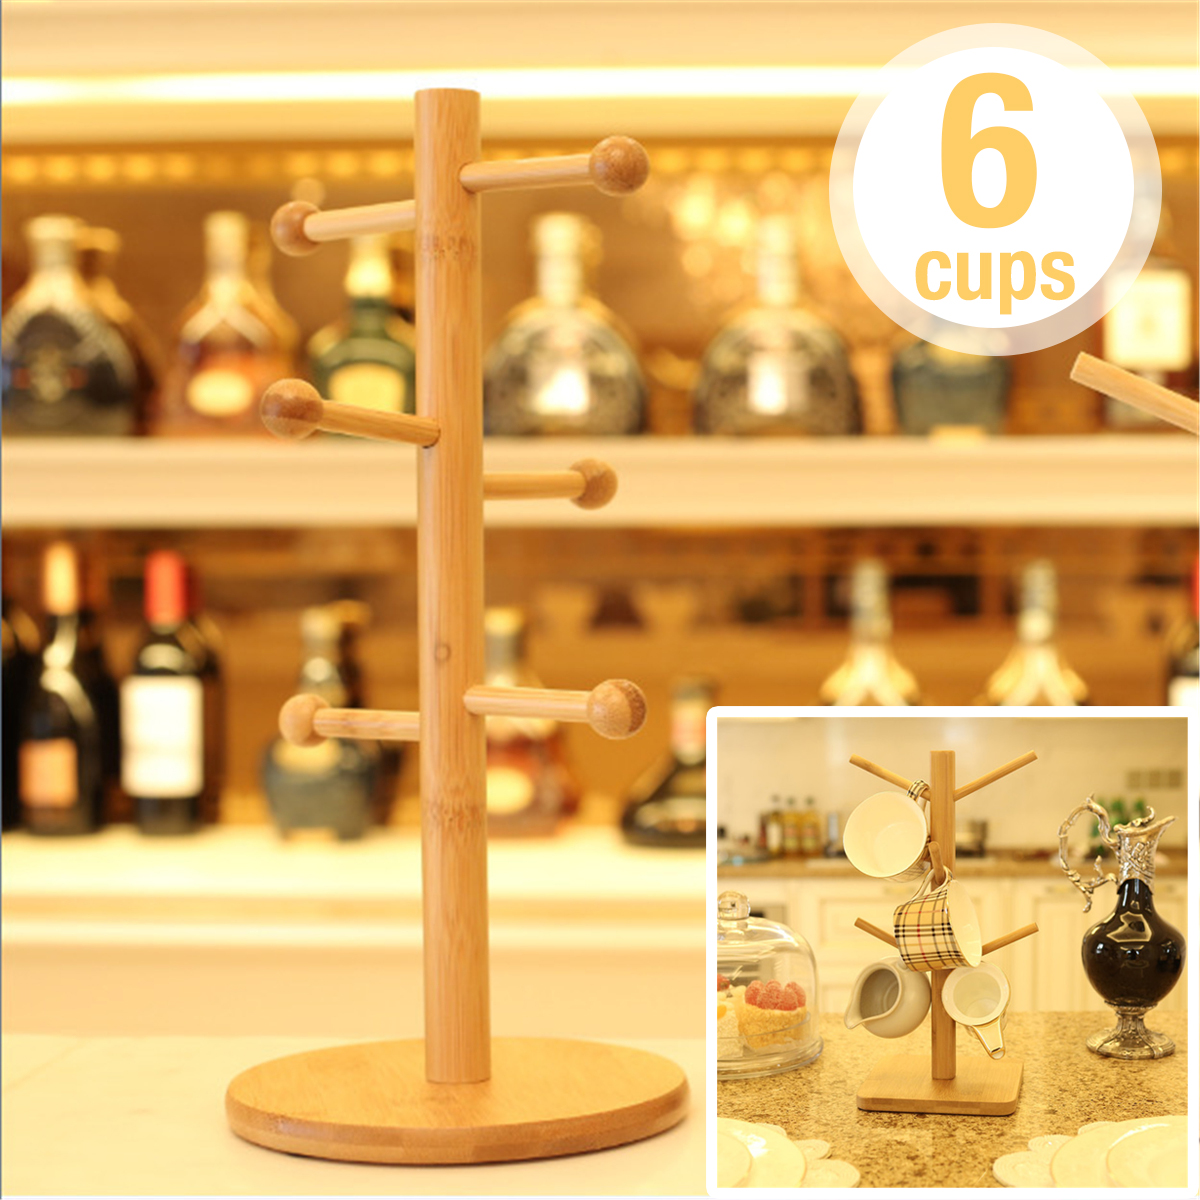 Wooden-Cup-Holder-Teacup-Mug-Drain-Rack-Stand-6-Cups-Drain-Cup-Hanging-Stand-Coffee-Cup-Display-Stan-1777089-2